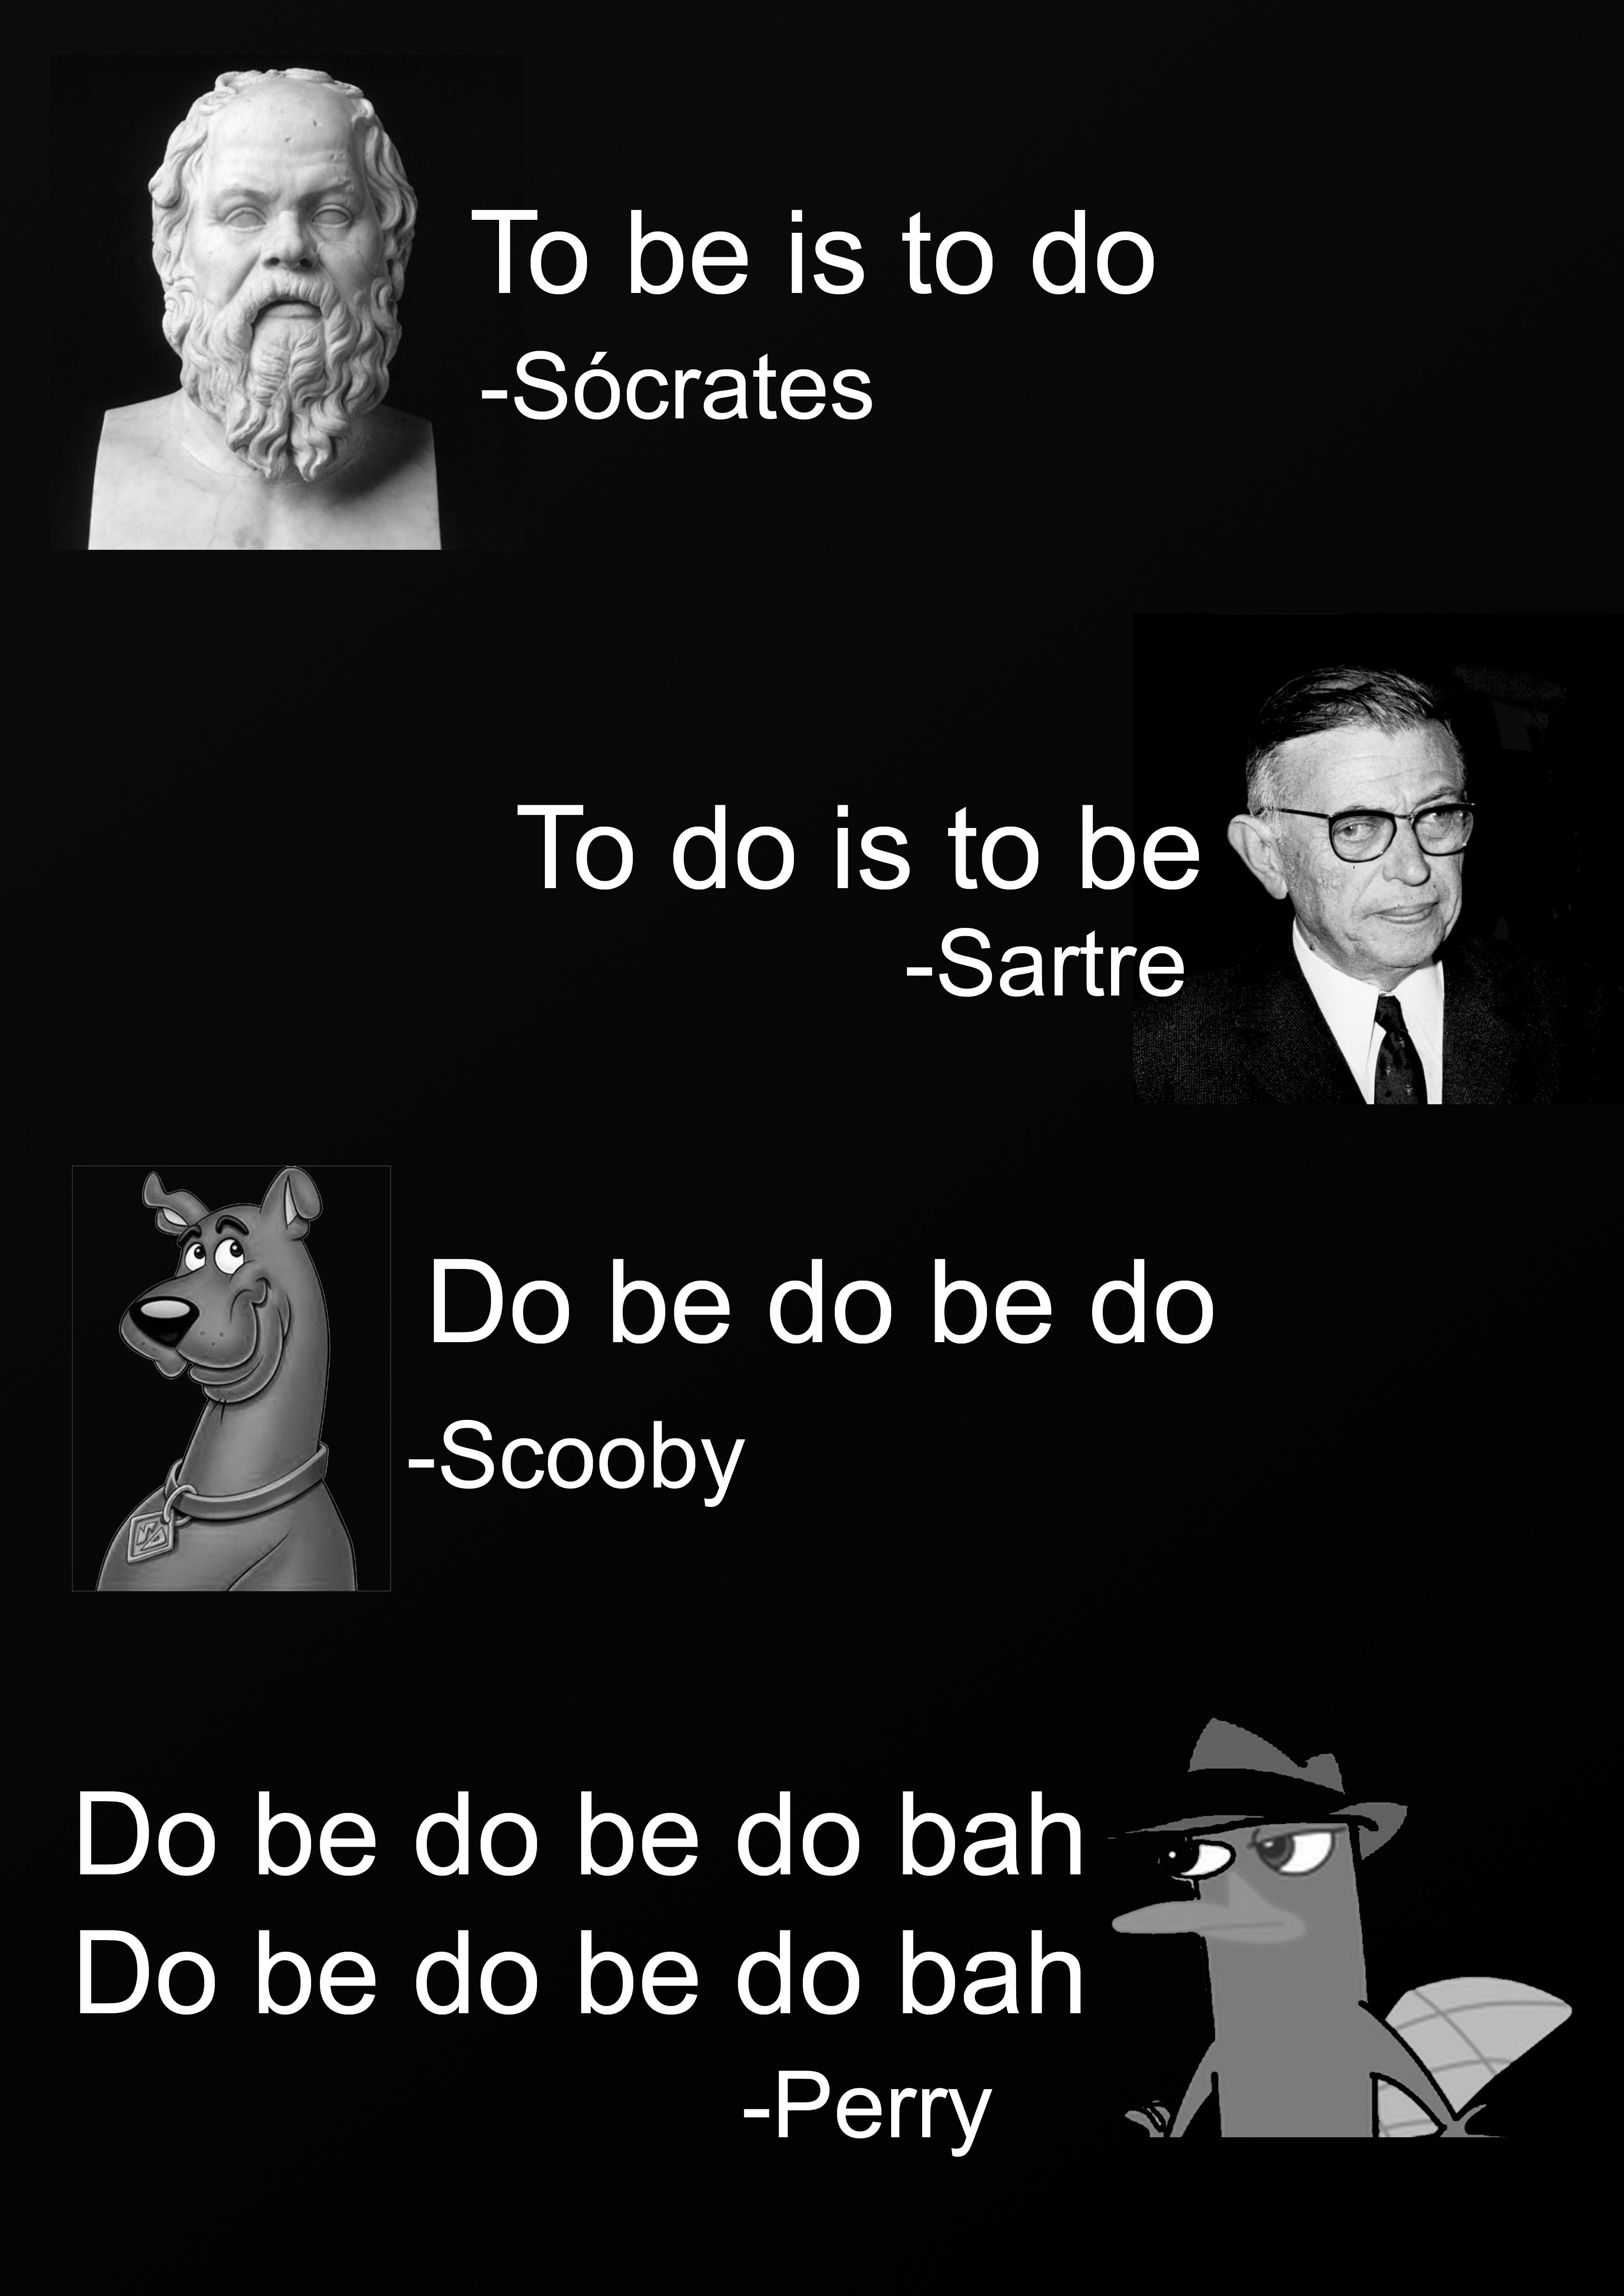 to do be do is be do bah